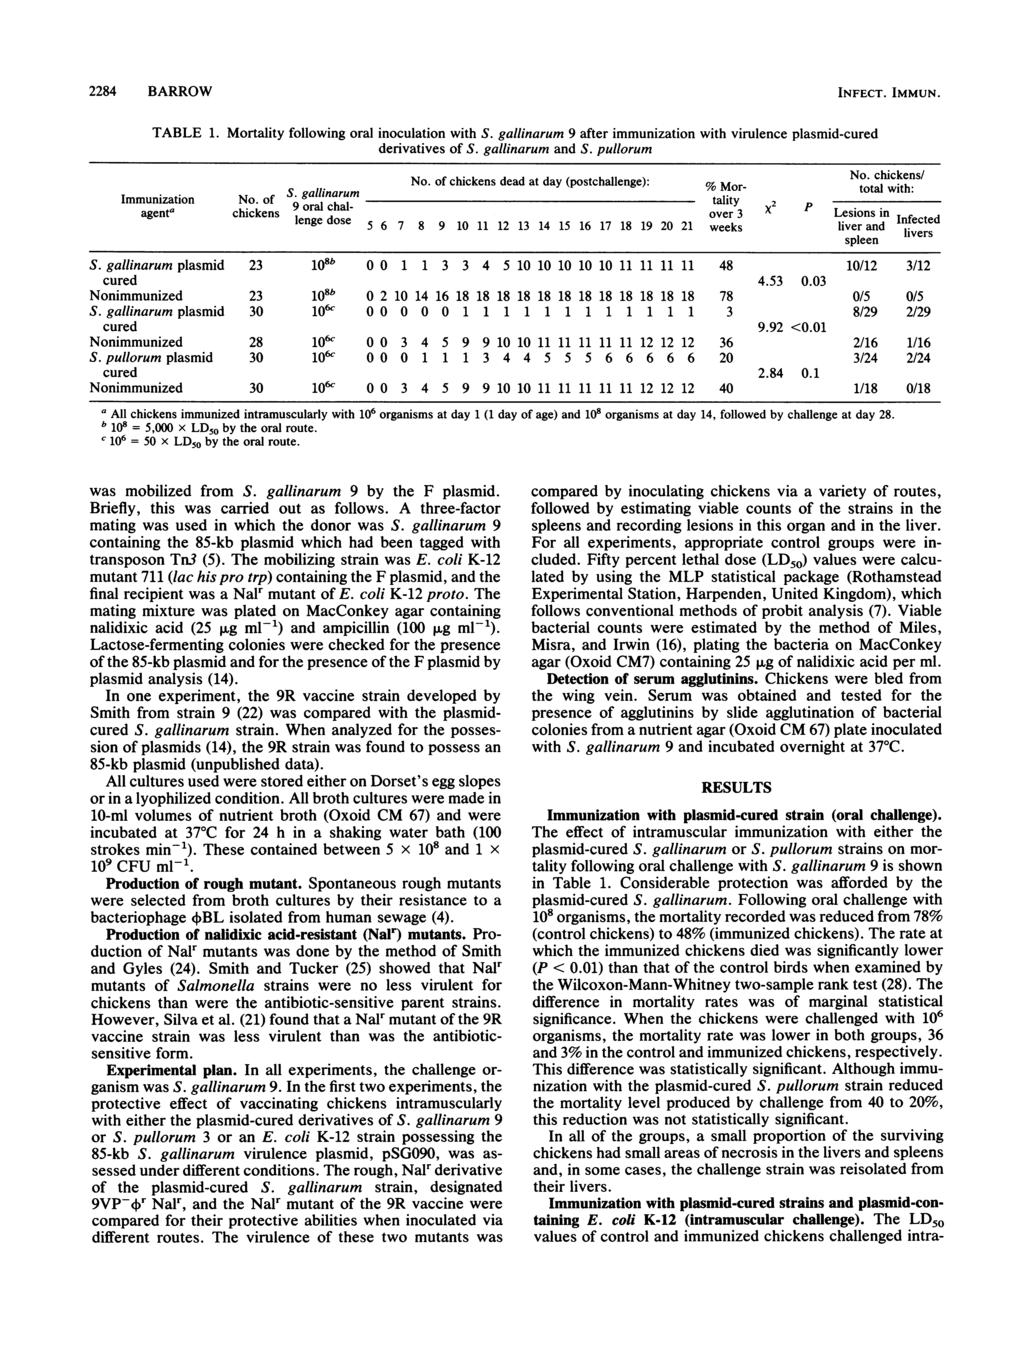 2284 BARROW INFECT. IMMUN. TABLE 1. Immuniztion Mortlity following orl inocultion with S. gllinrum 9 fter immuniztion with virulence plsmid-cured derivtives of S. gllinrum nd S. pullorum No. of No.